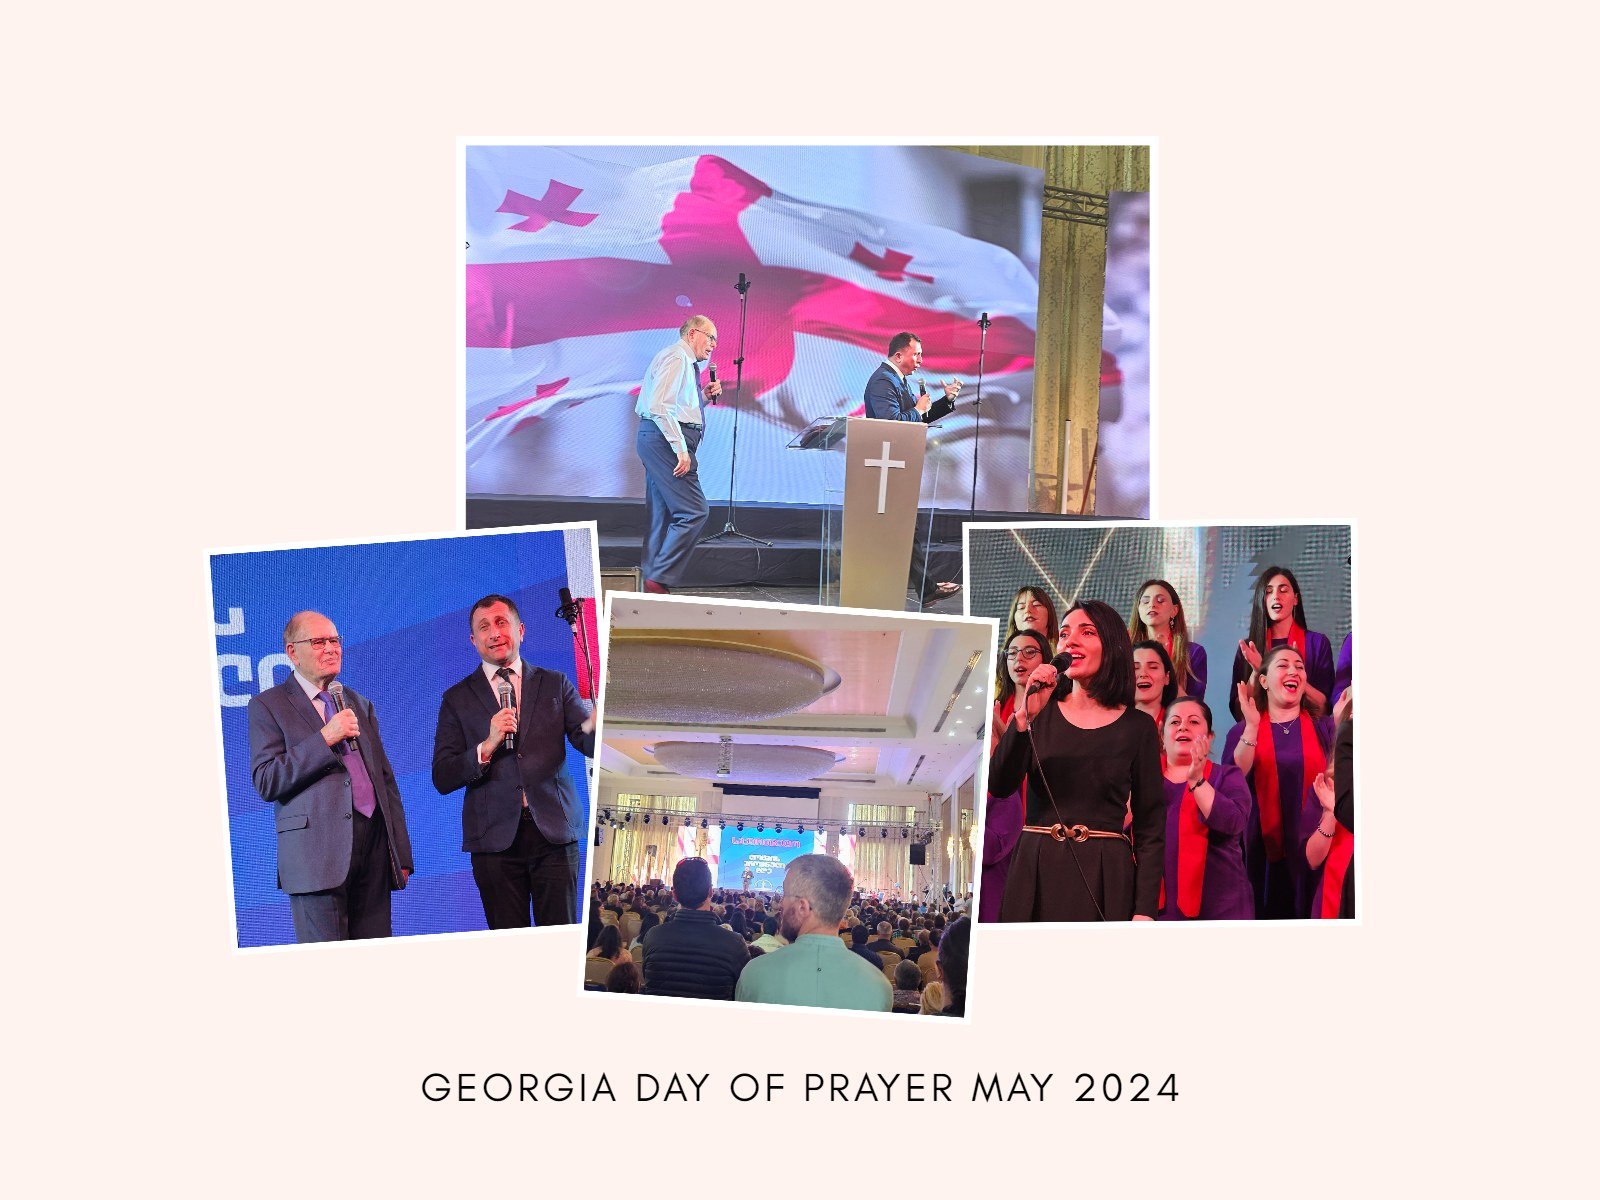 On 9th May David called a Day of Prayer for Georgia, proving from his life-time's experience, that our God answers prayer - powerfully. At a time of deep division in the country - will the nation retain its legal independence of the Kremlin lawmakers